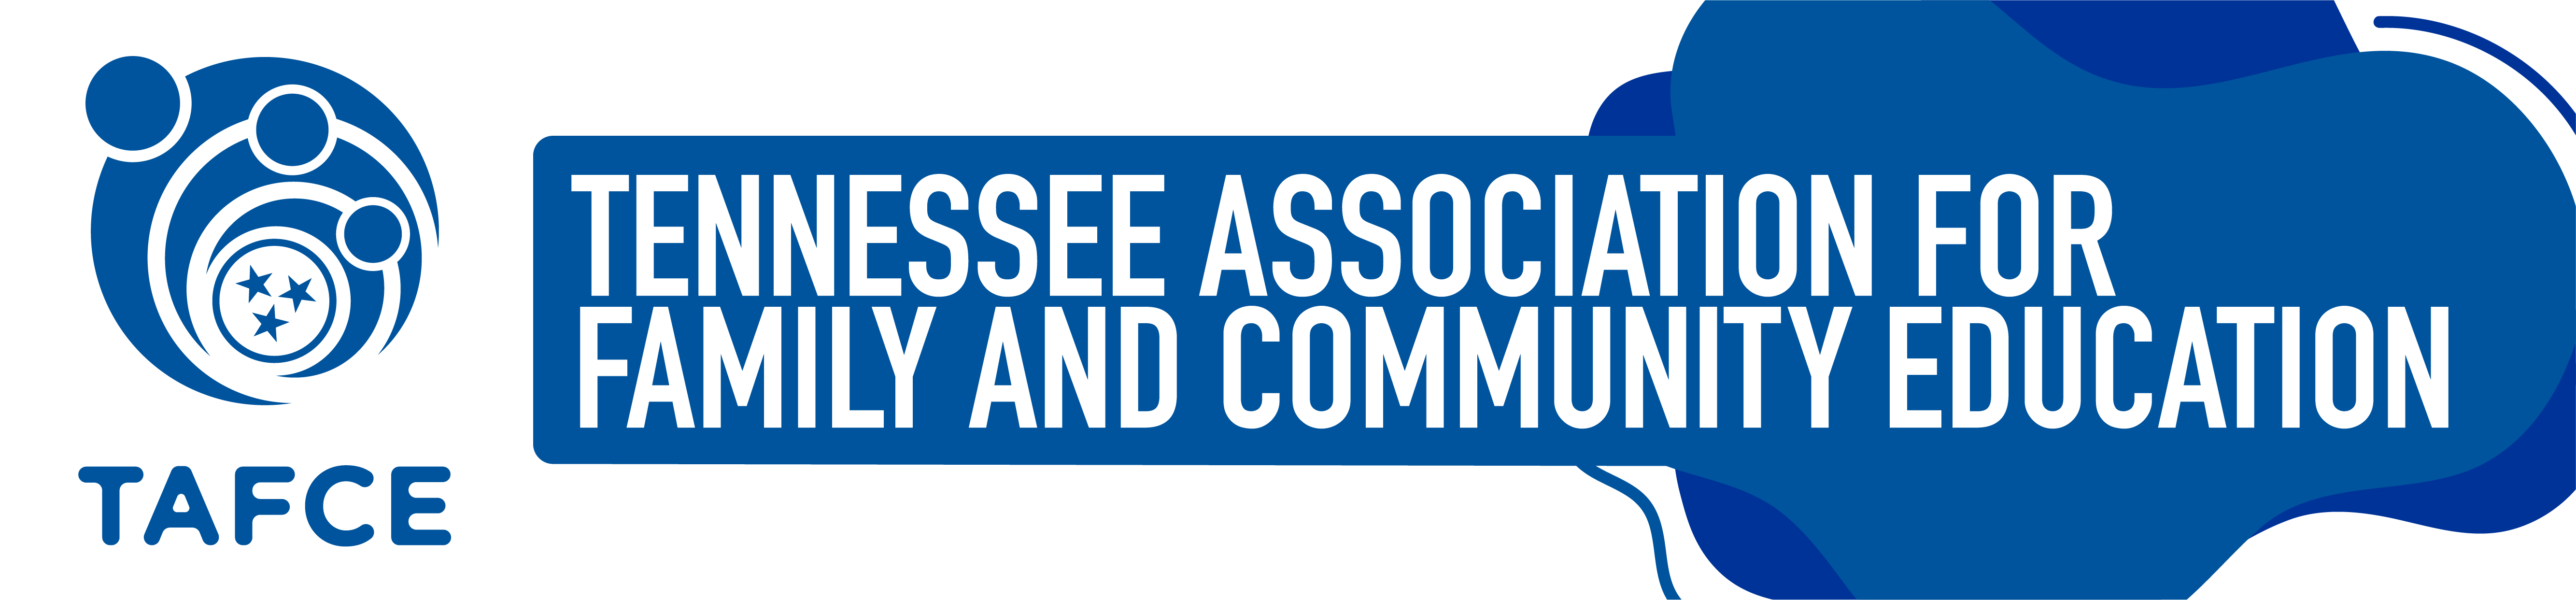 Tennessee Association for Family and Community Education (TAFCE)